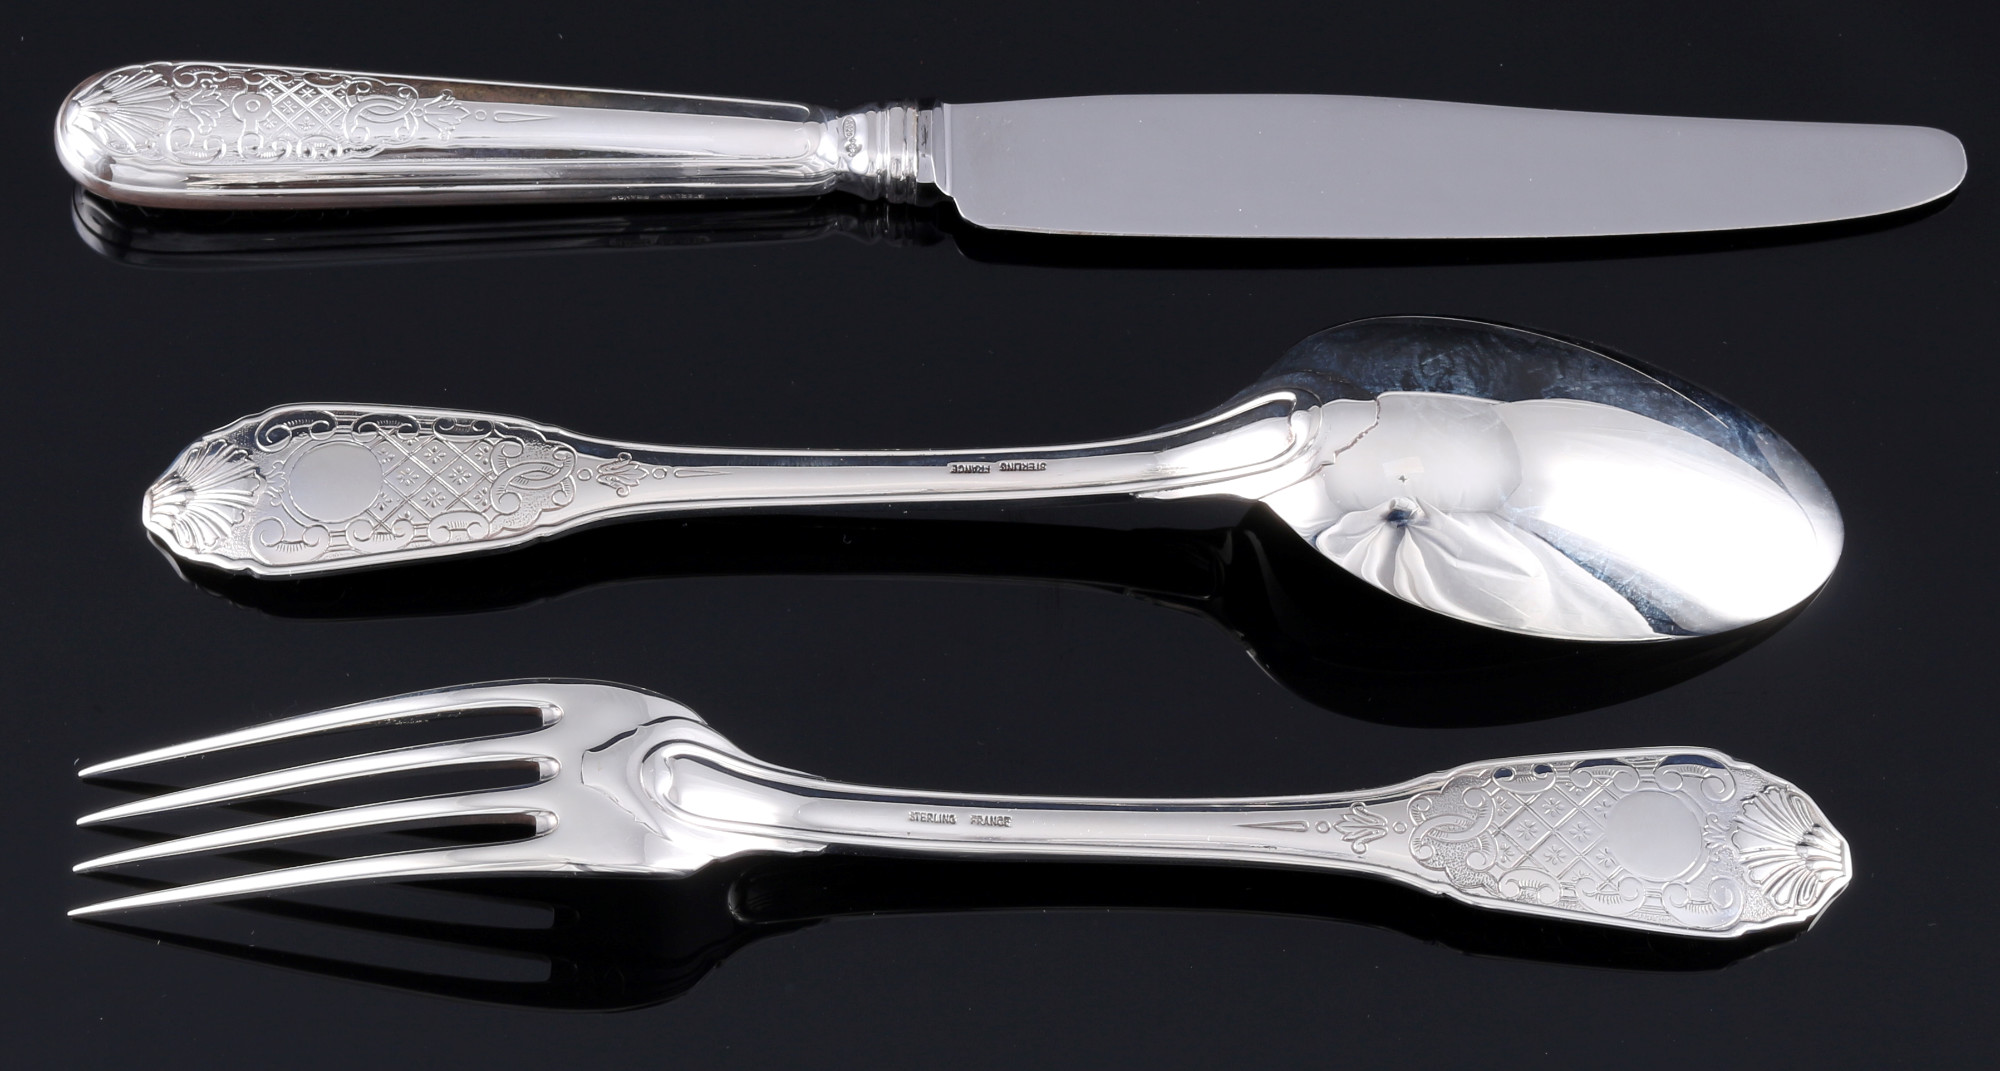 Christofle Royal Cisele 925 sterling silver cutlery for 6 persons, Silber Besteck für 6 Personen, - Image 3 of 5